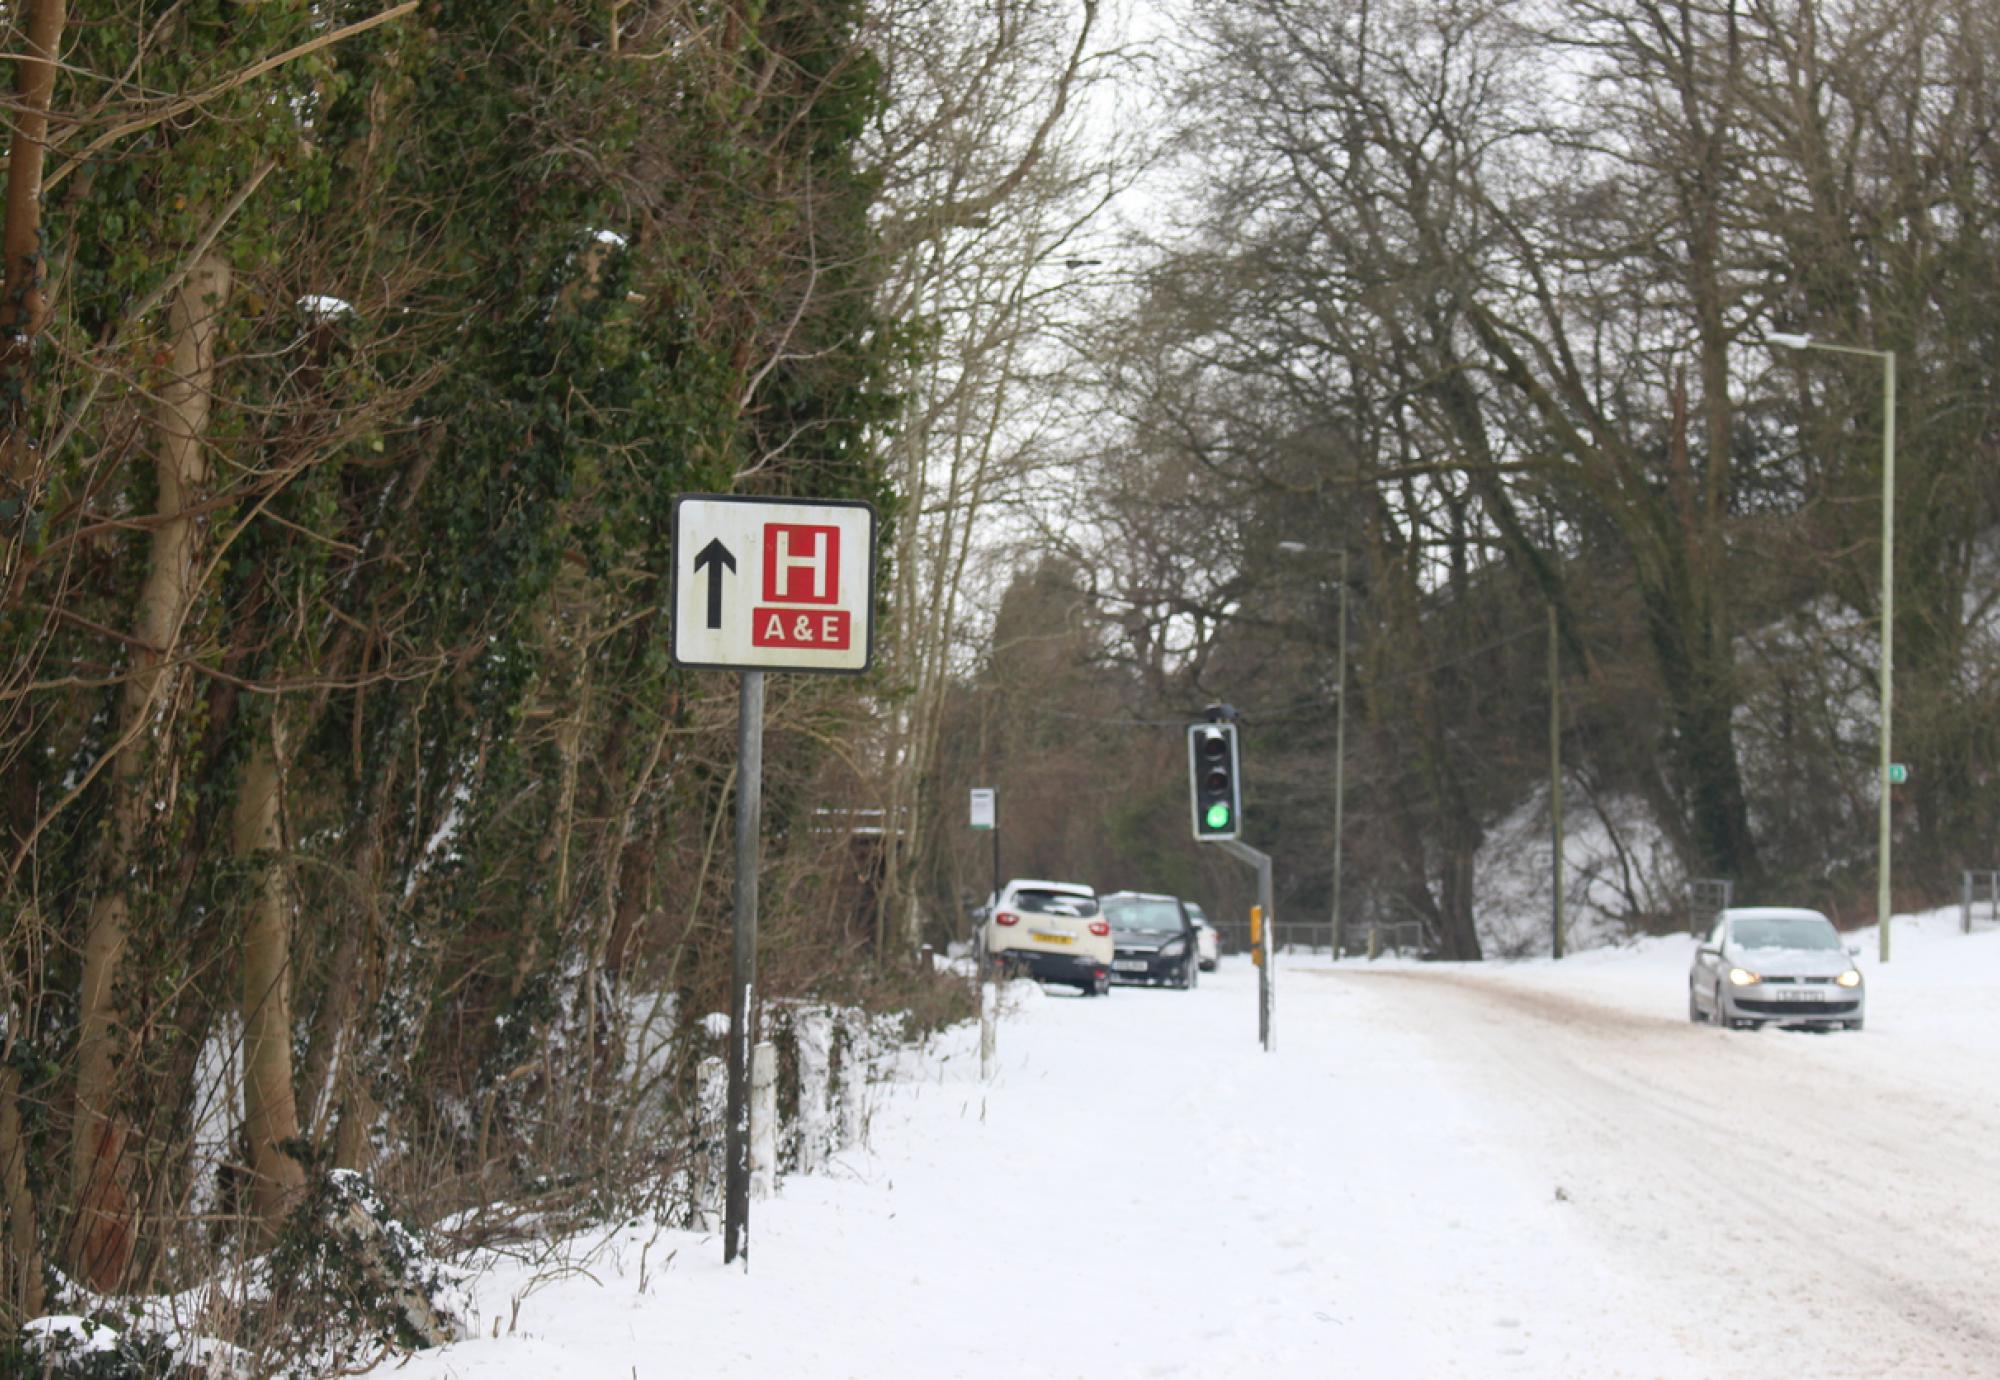 A sign for a hospital on a snowy road